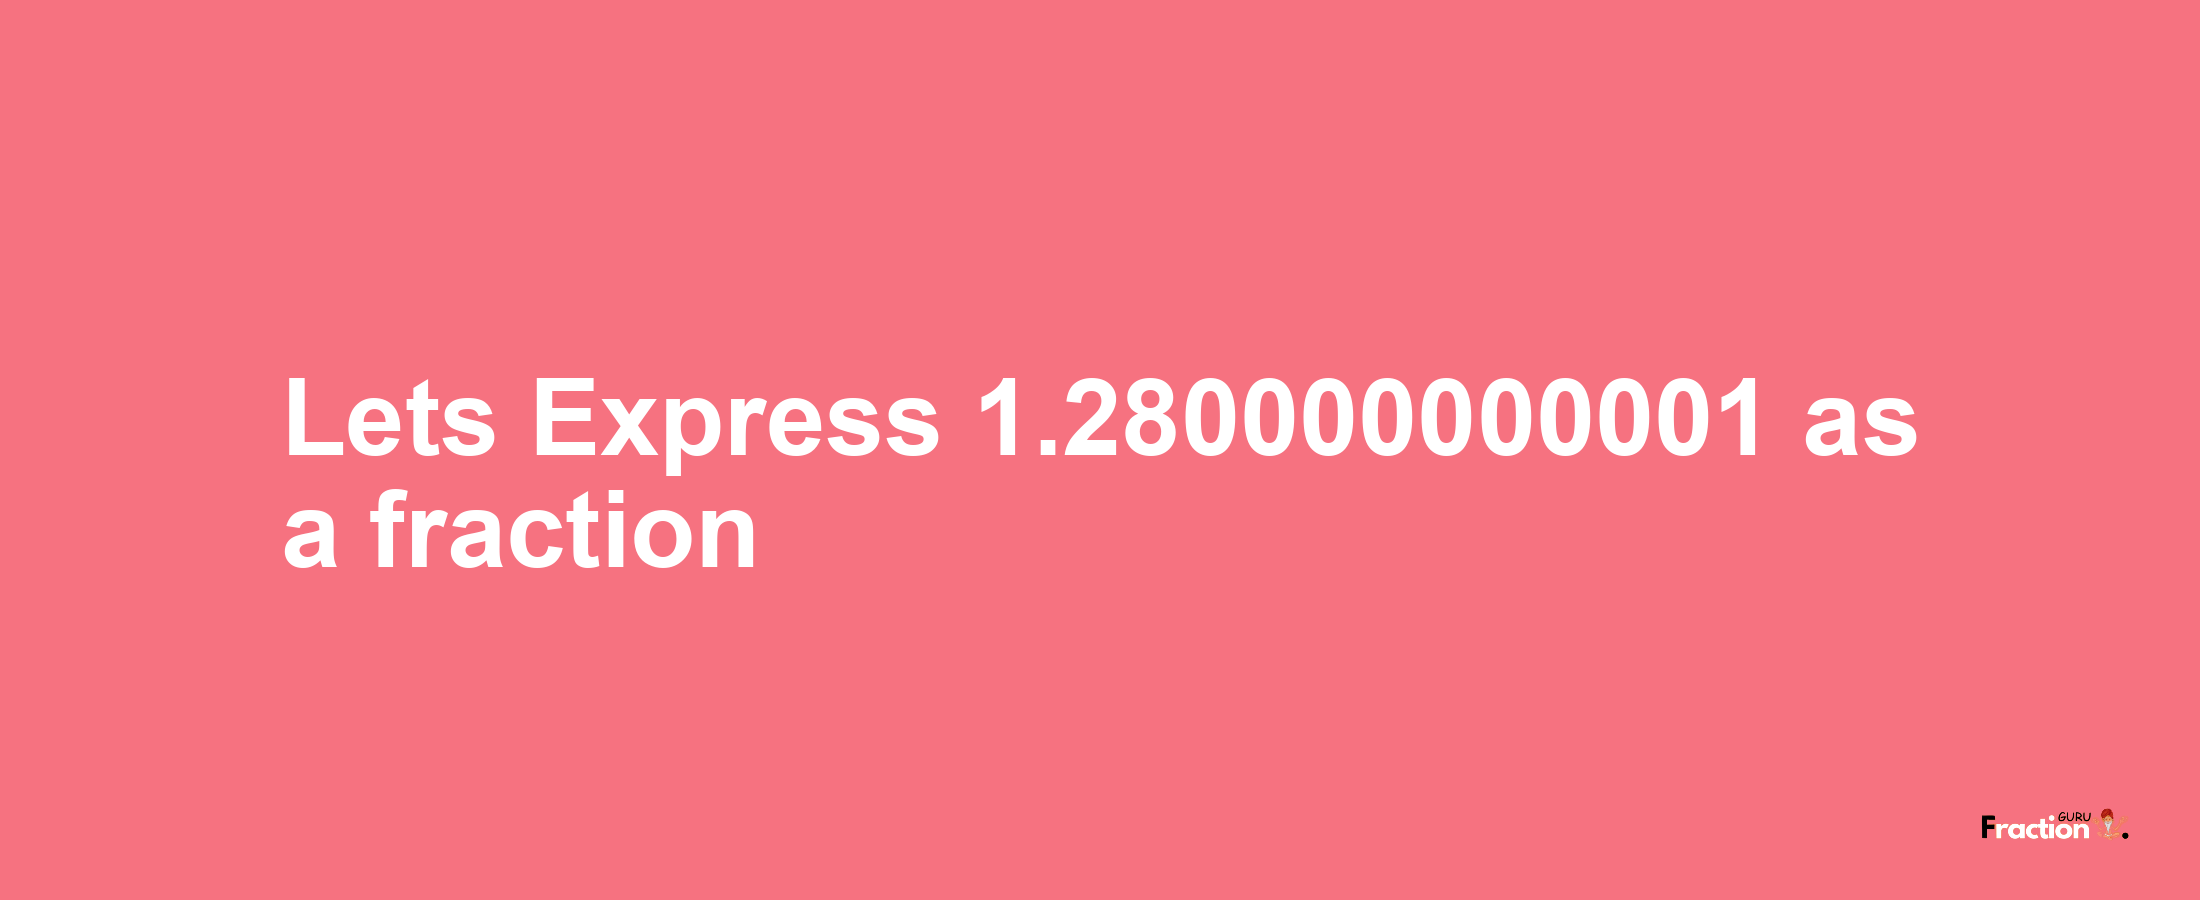 Lets Express 1.280000000001 as afraction